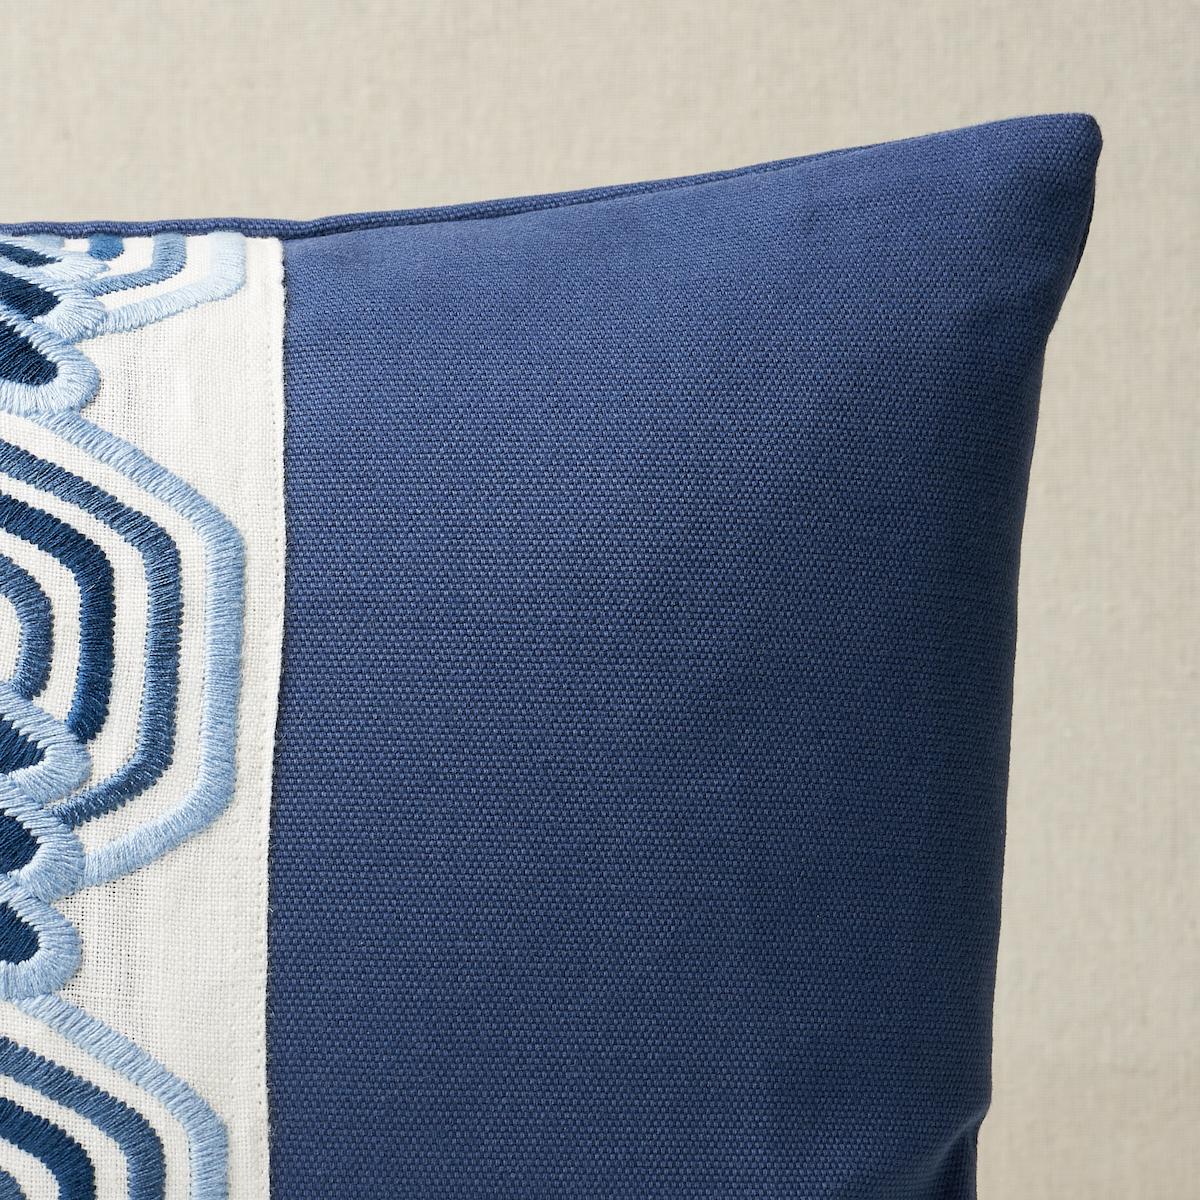 The Twist Embroidered Pillow 16